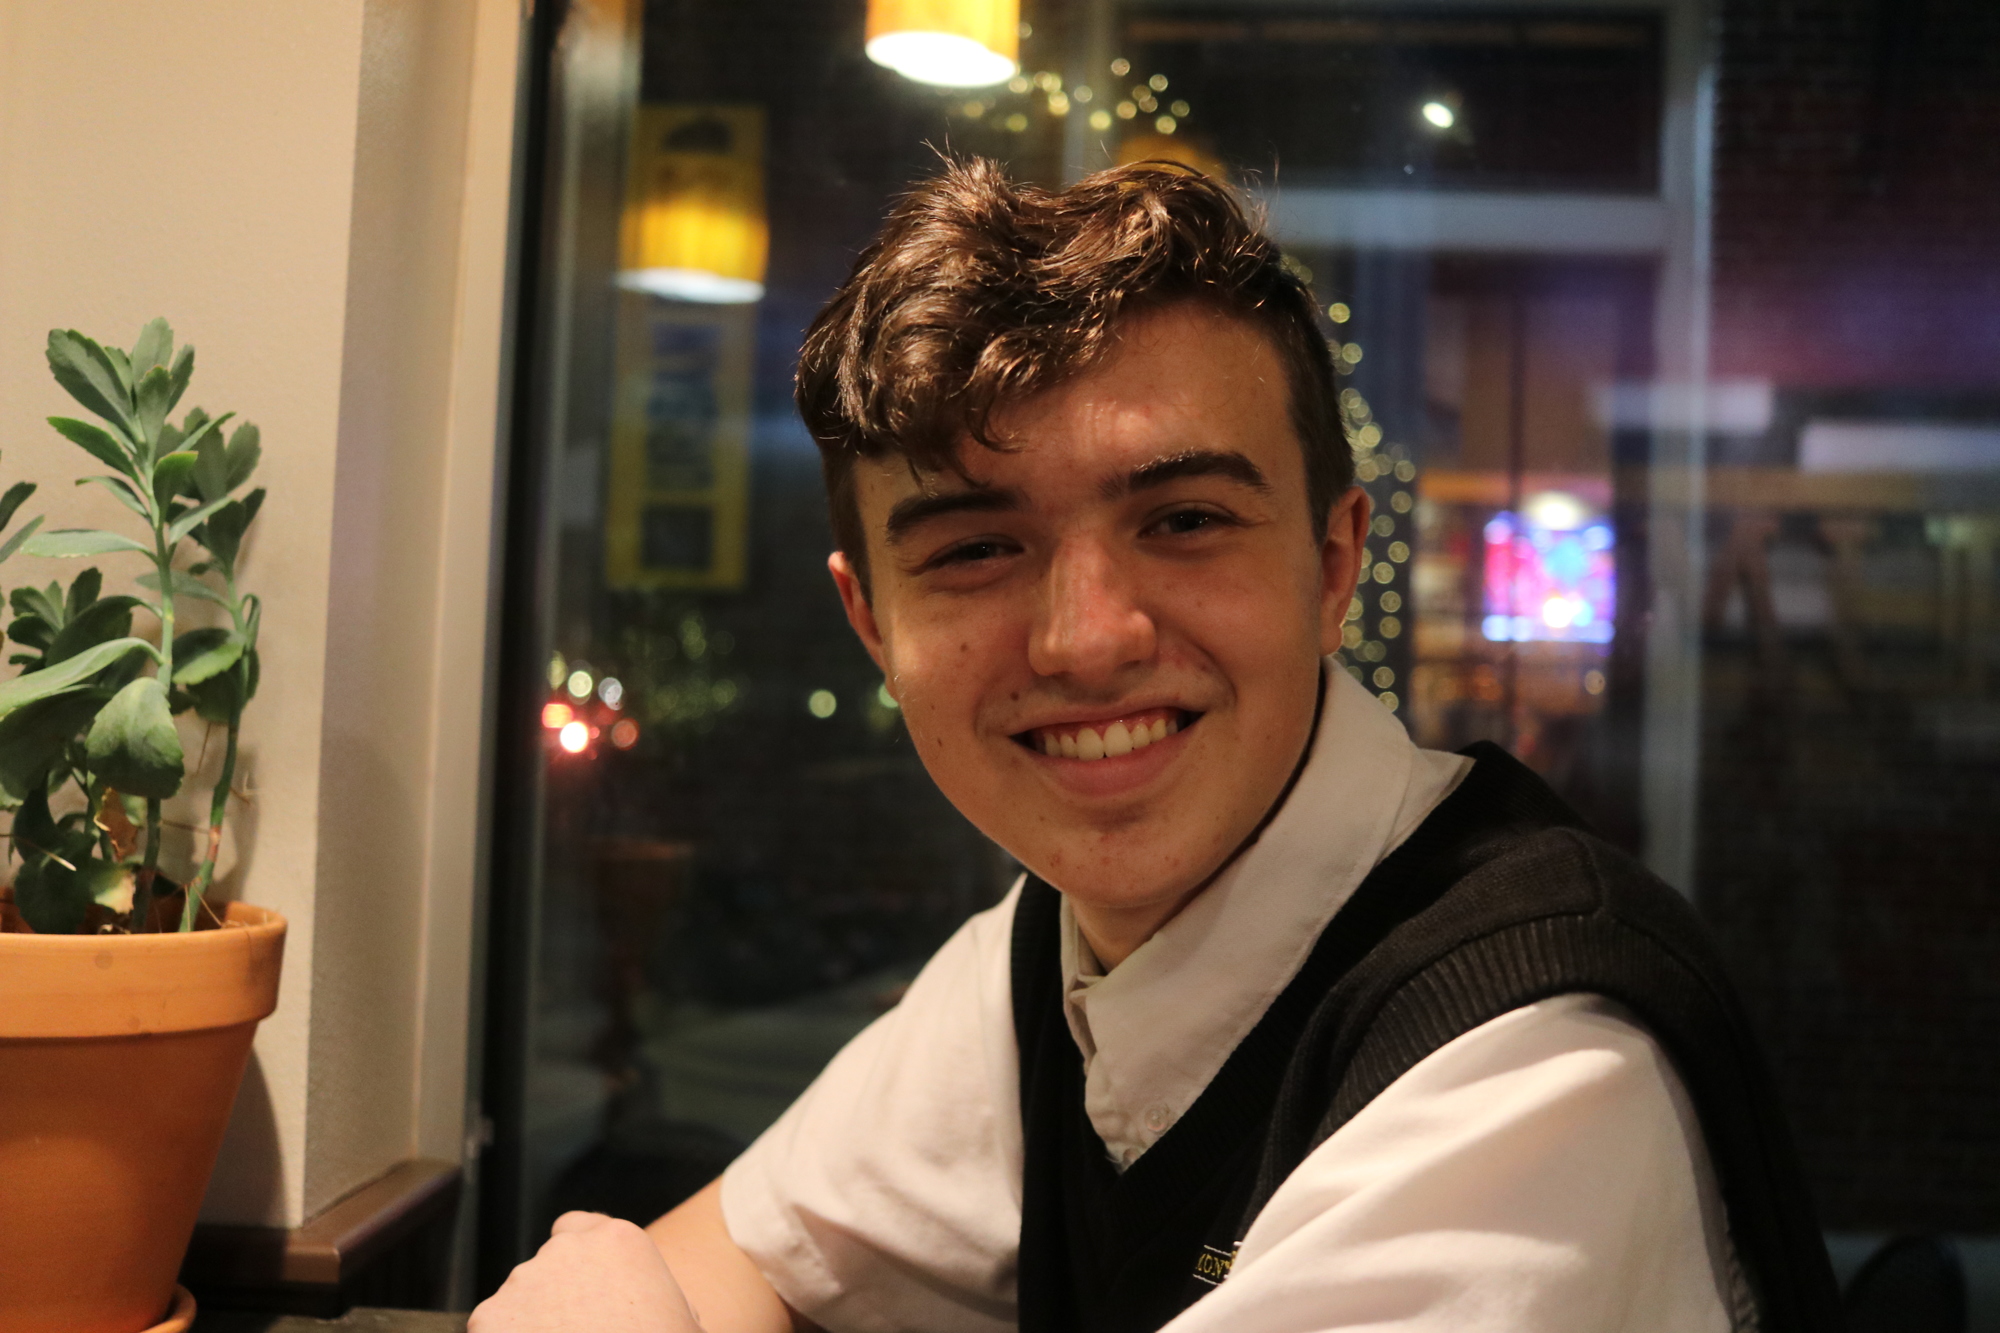 Aiden Bjortvedt will be playing the piano for the three student singers who will be performing at the Garden Theatre’s upcoming annual gala, Encore 2019: An Evening with Chita Rivera.